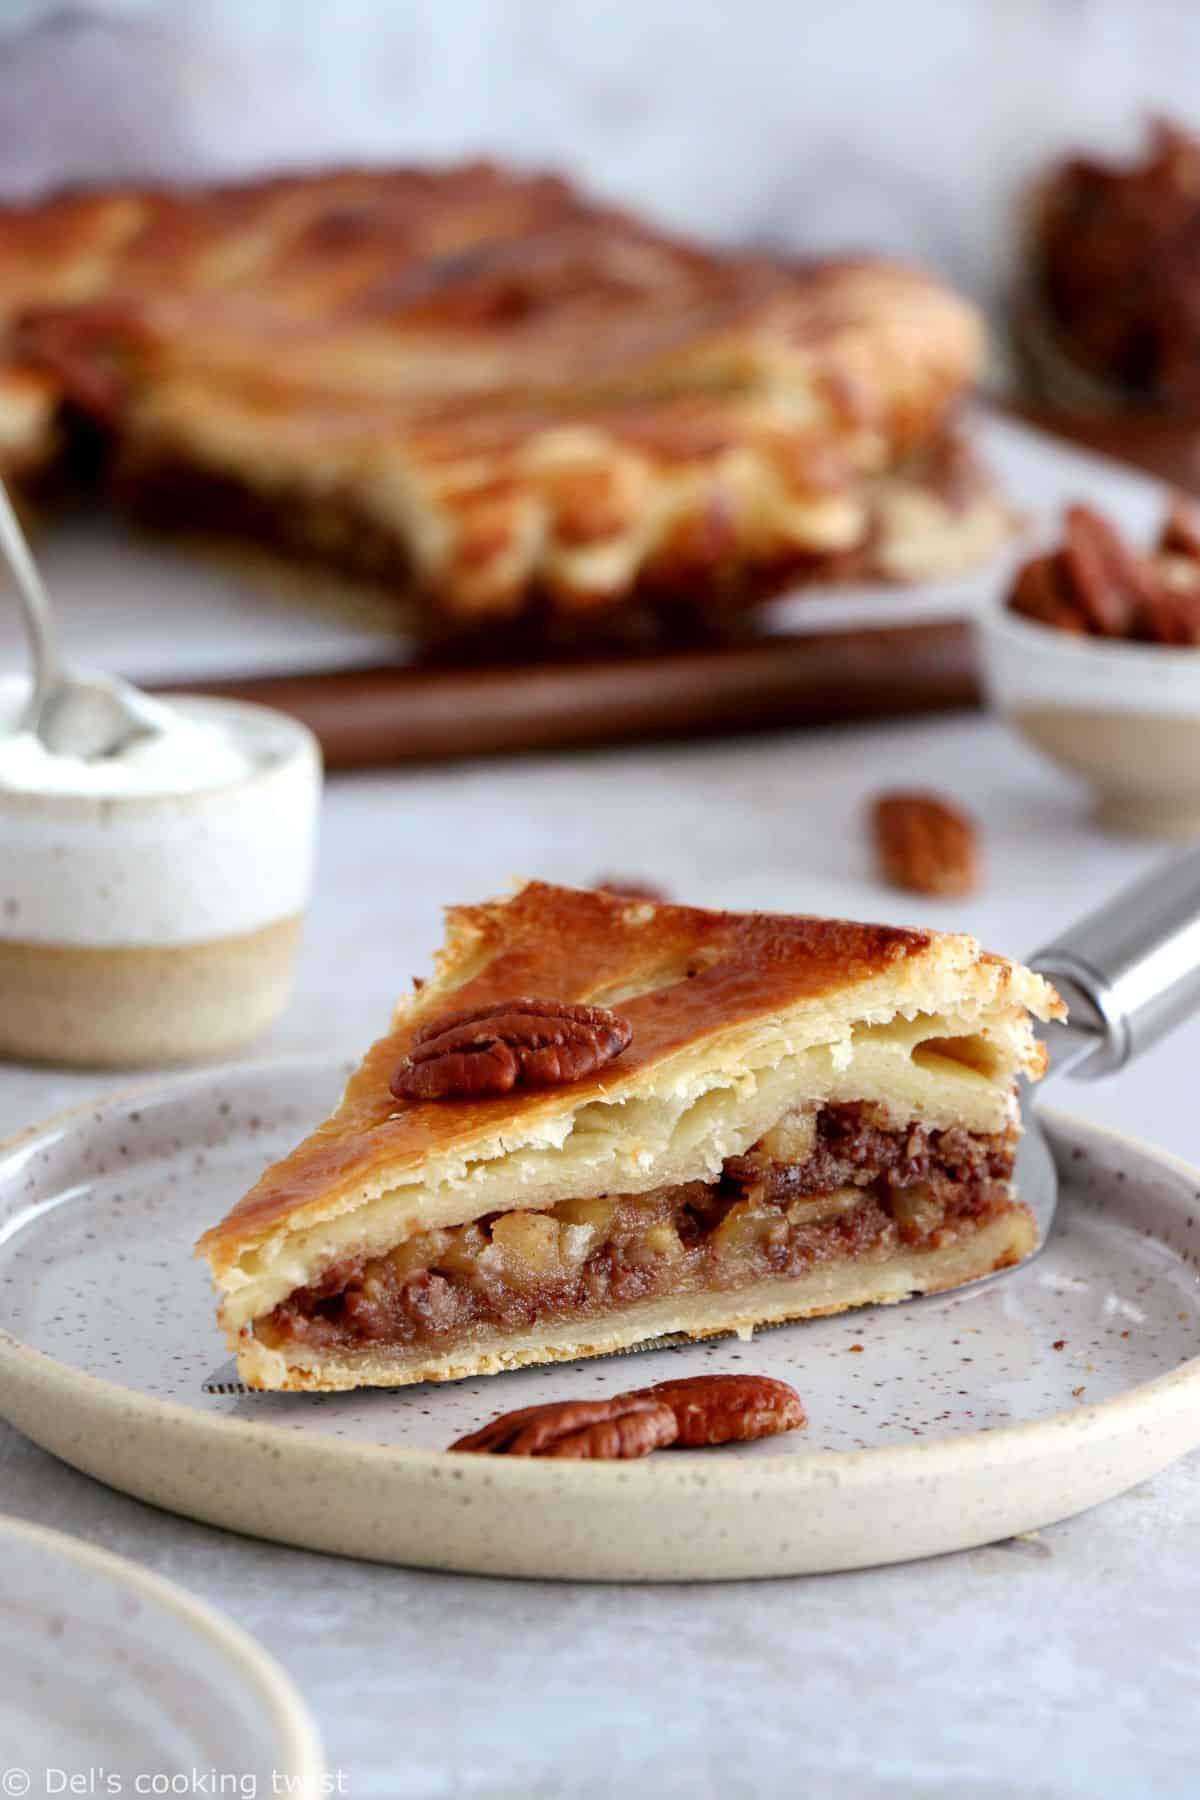 This apple pecan galette des rois is a wonderful twist on the classic French dessert galette des rois usually prepared with frangipane and served for the Epiphany.